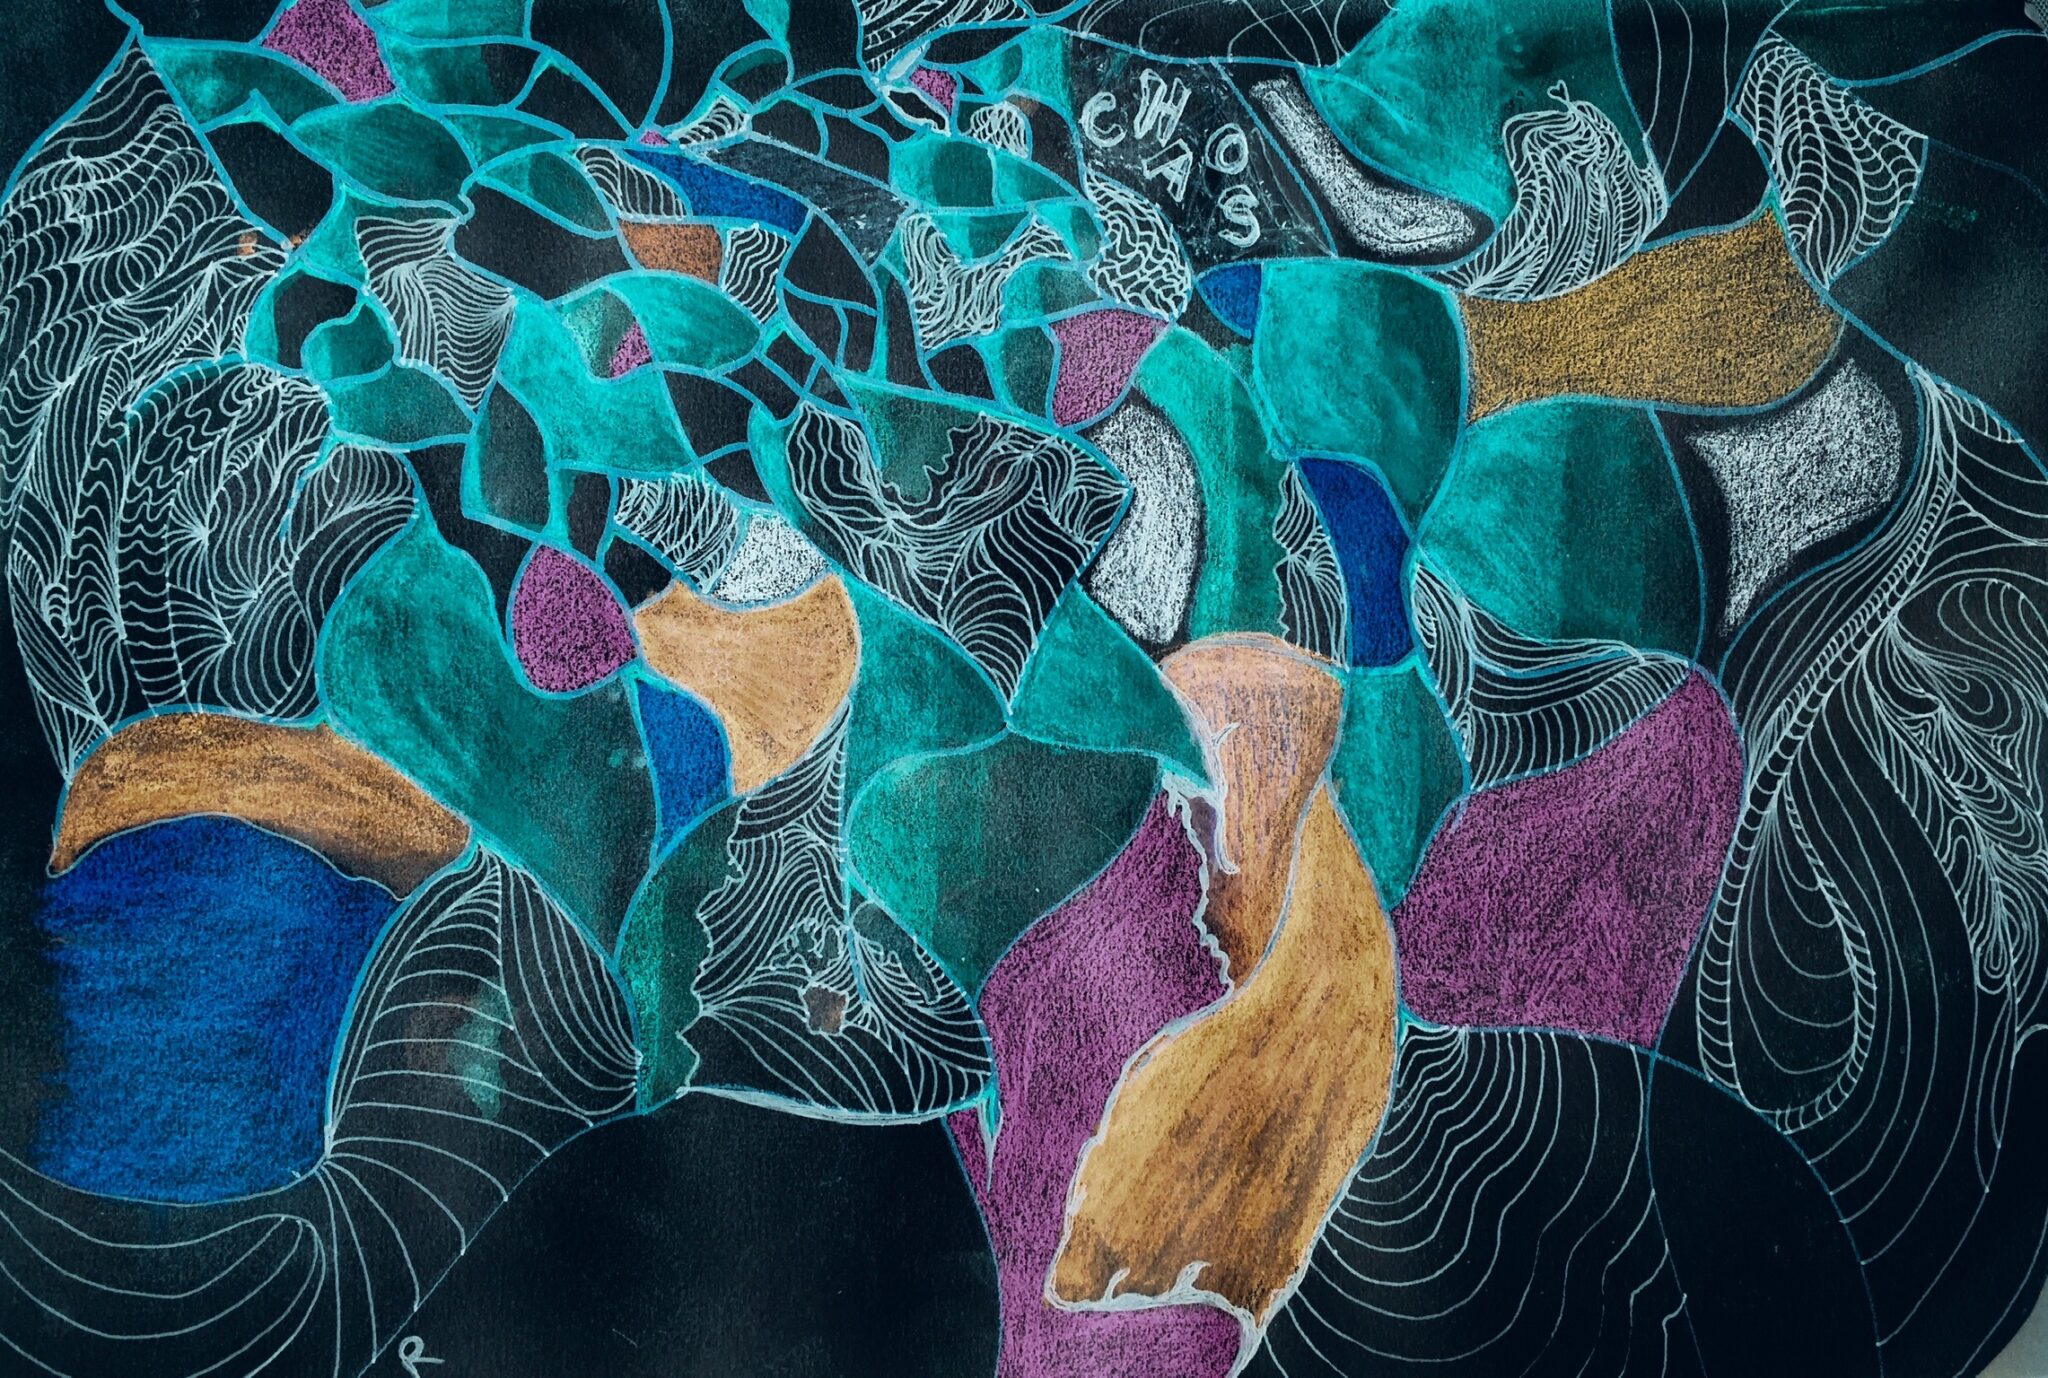 Organised Chaos, ink water color on paper. Lianne Morgan 2021